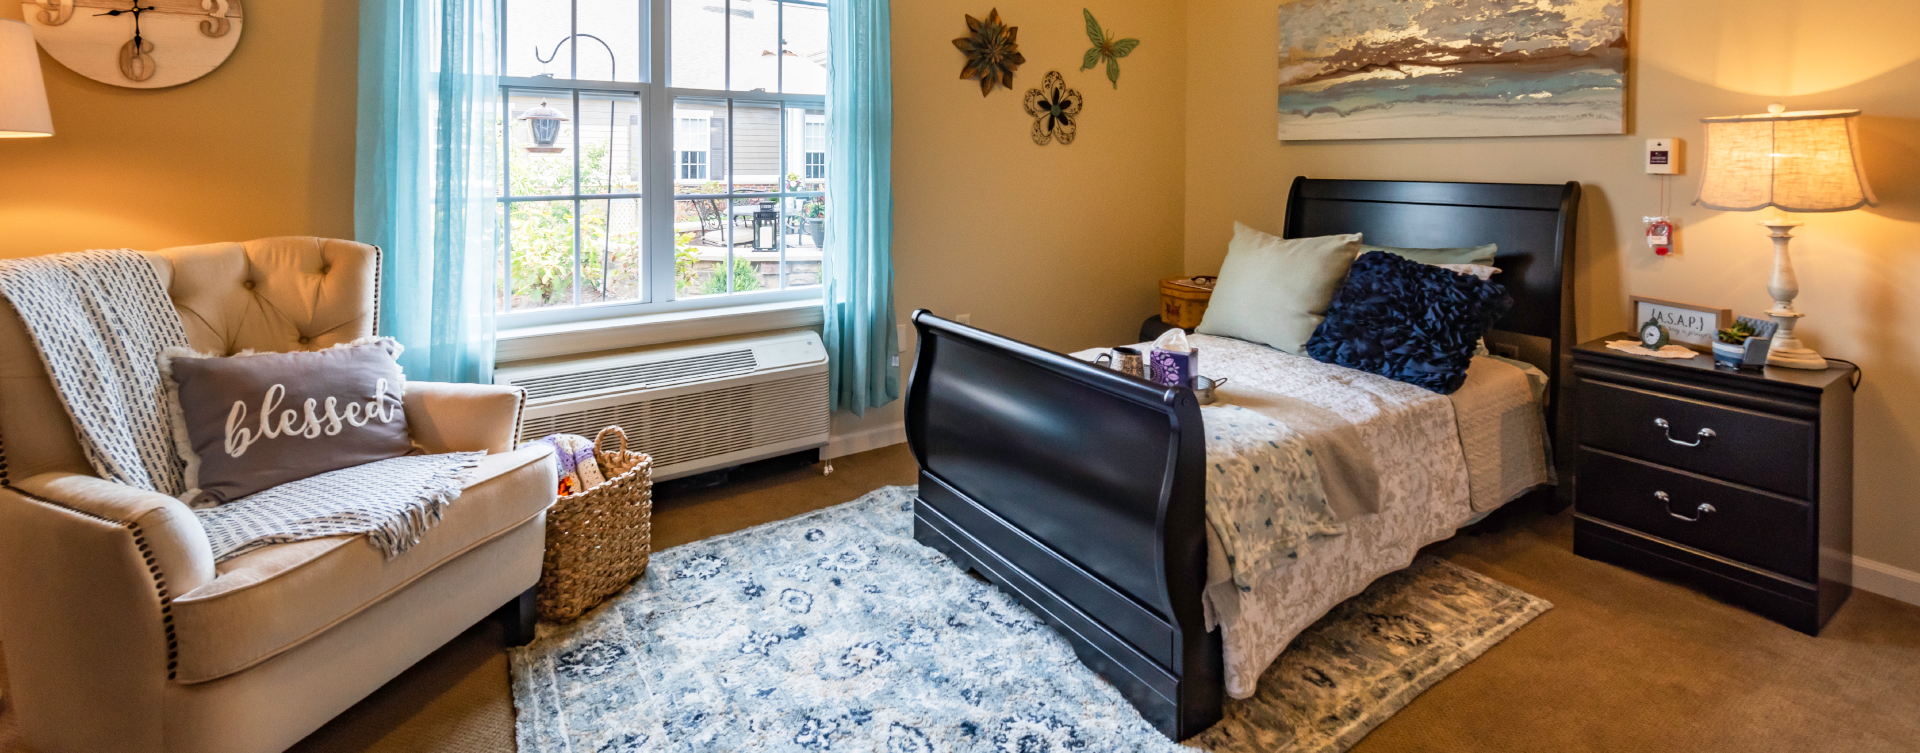 Get a new lease on life with a cozy apartment at Bickford of Shelby Township